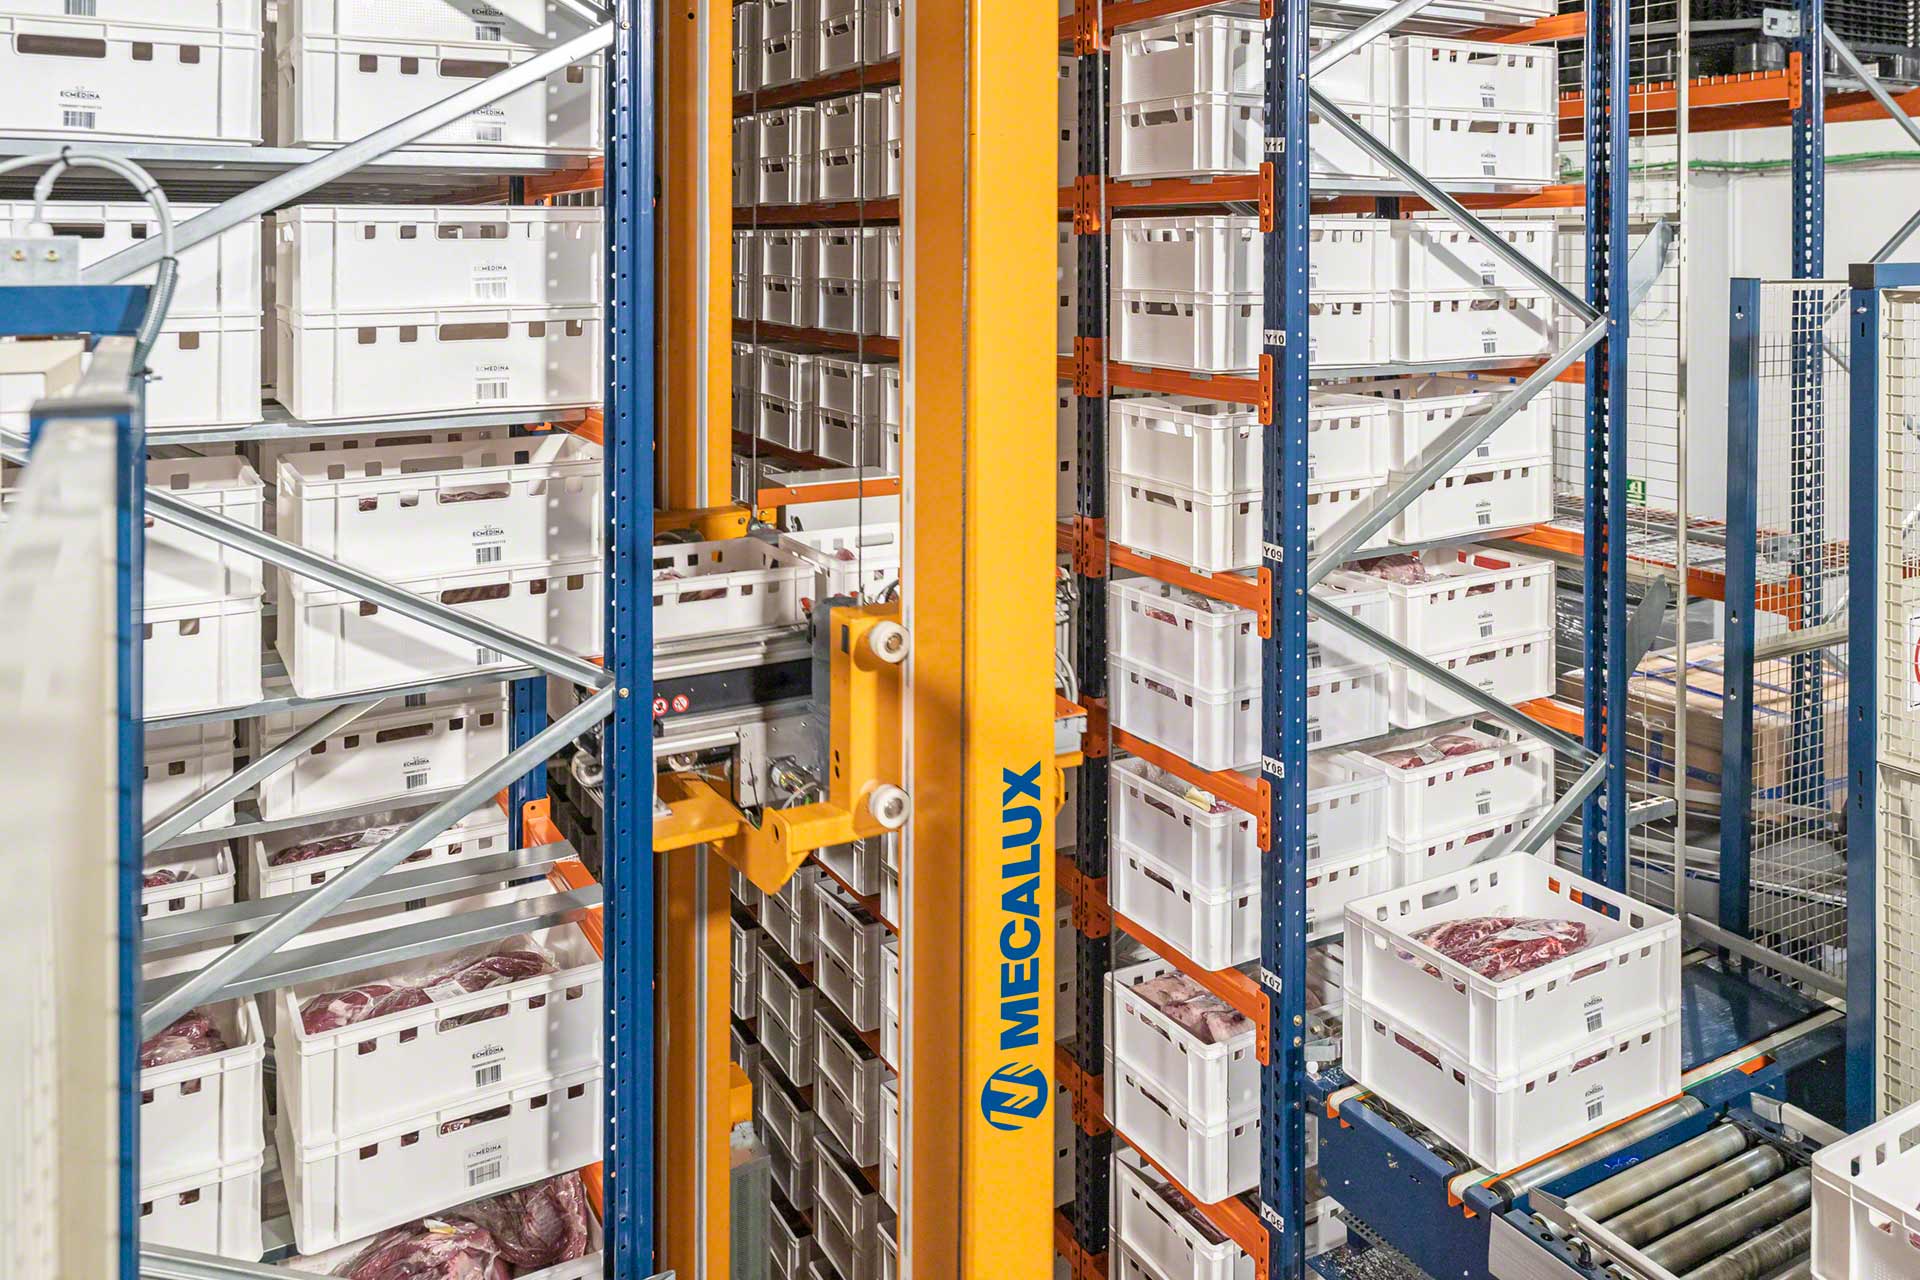 The combined cycles of stacker cranes multiplies the flow of goods movements in an AS/RS